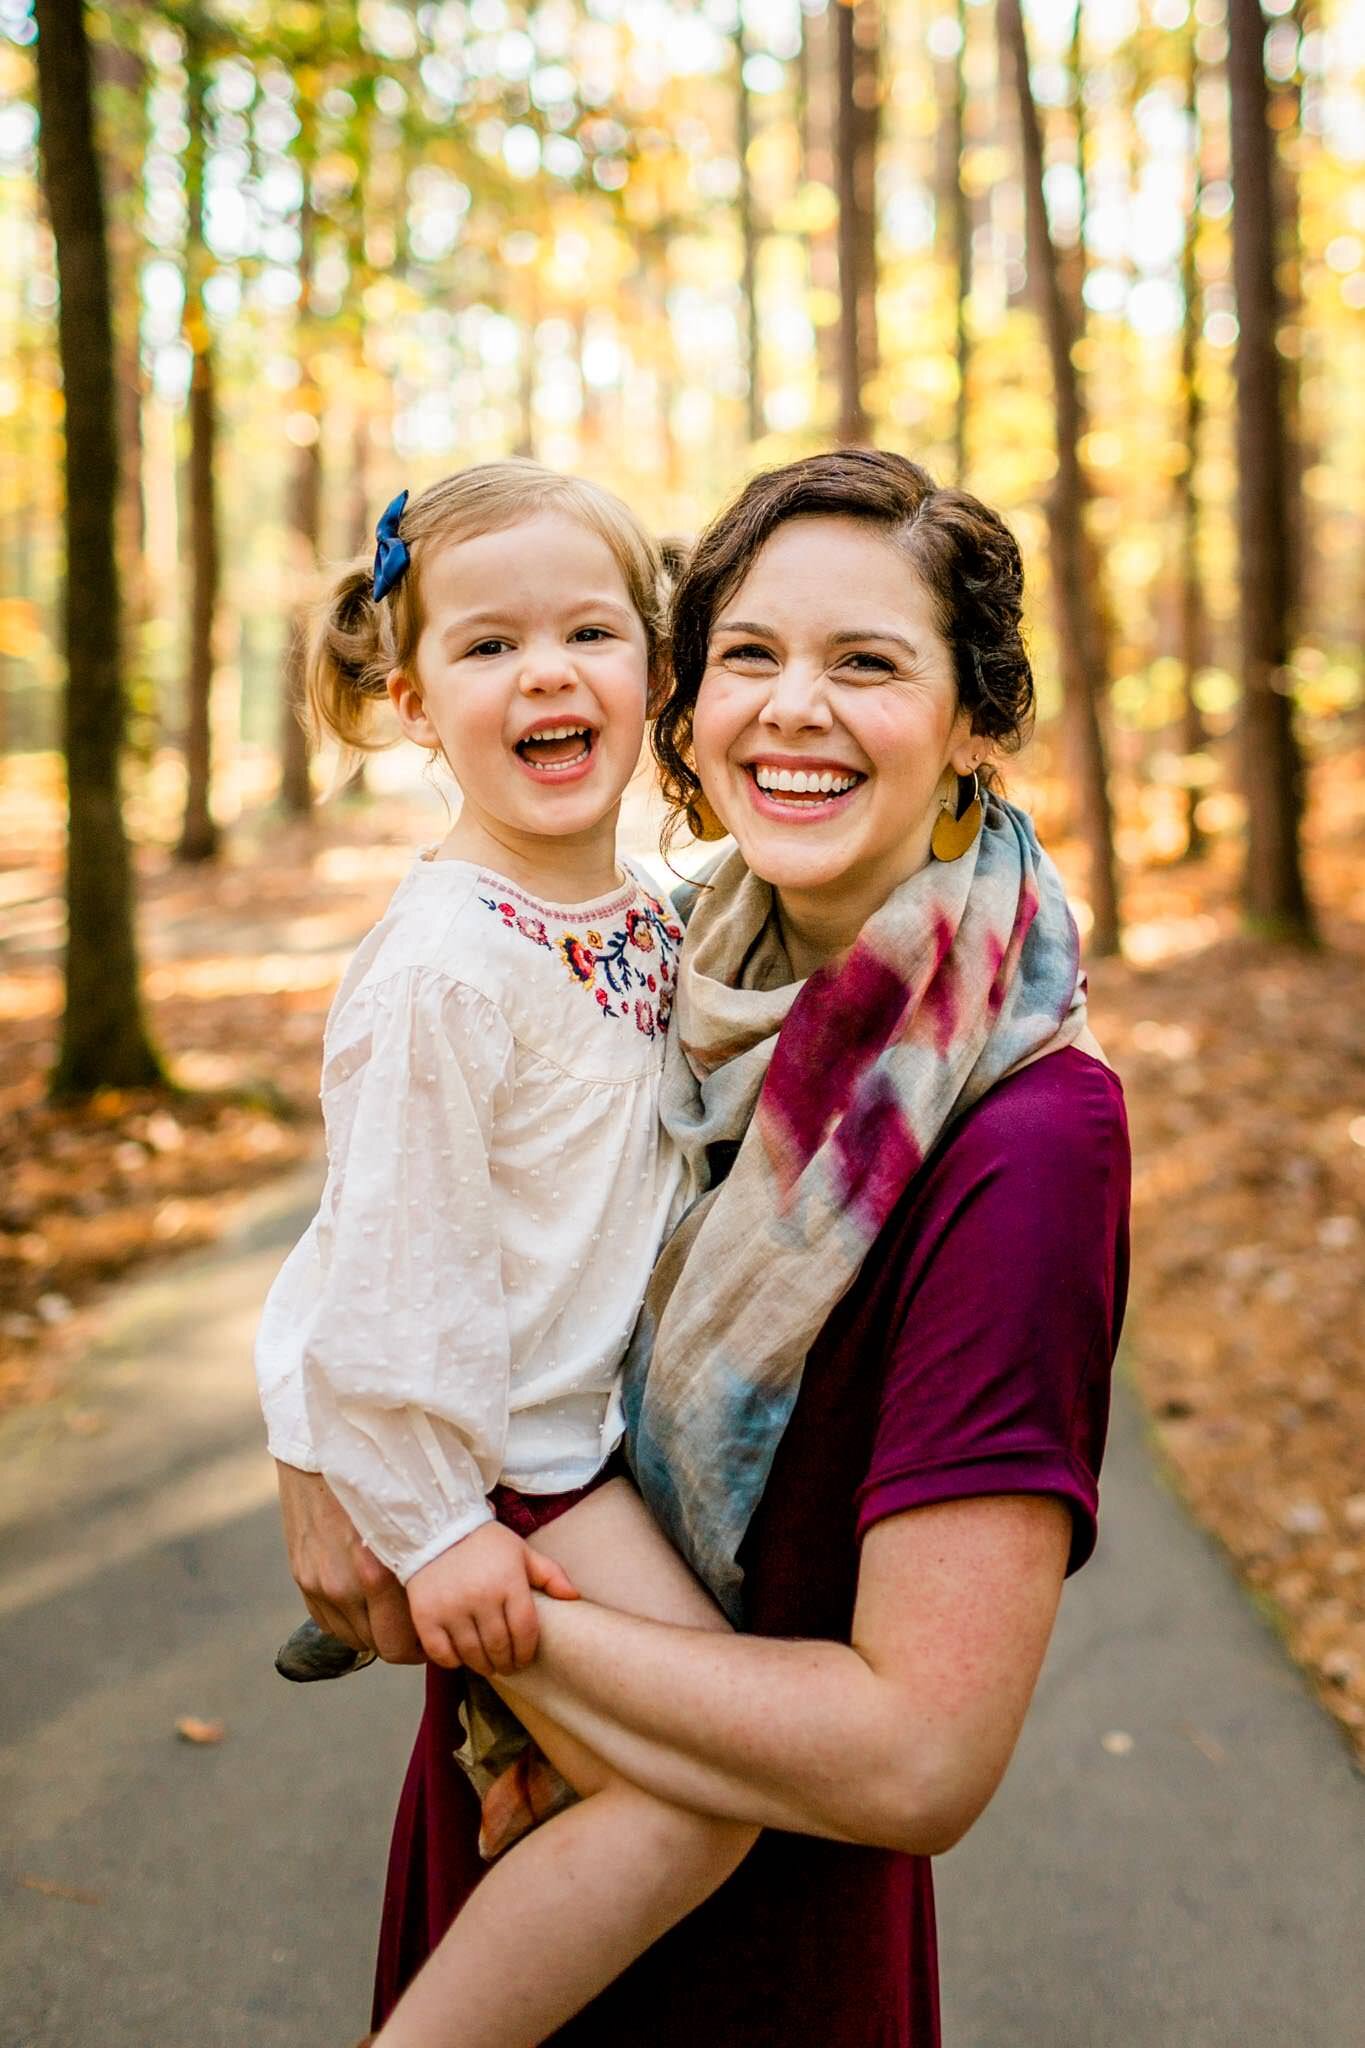 Raleigh Family Photographer | By G. Lin Photography | Umstead Park | Mother holding toddler girl and smiling at camera